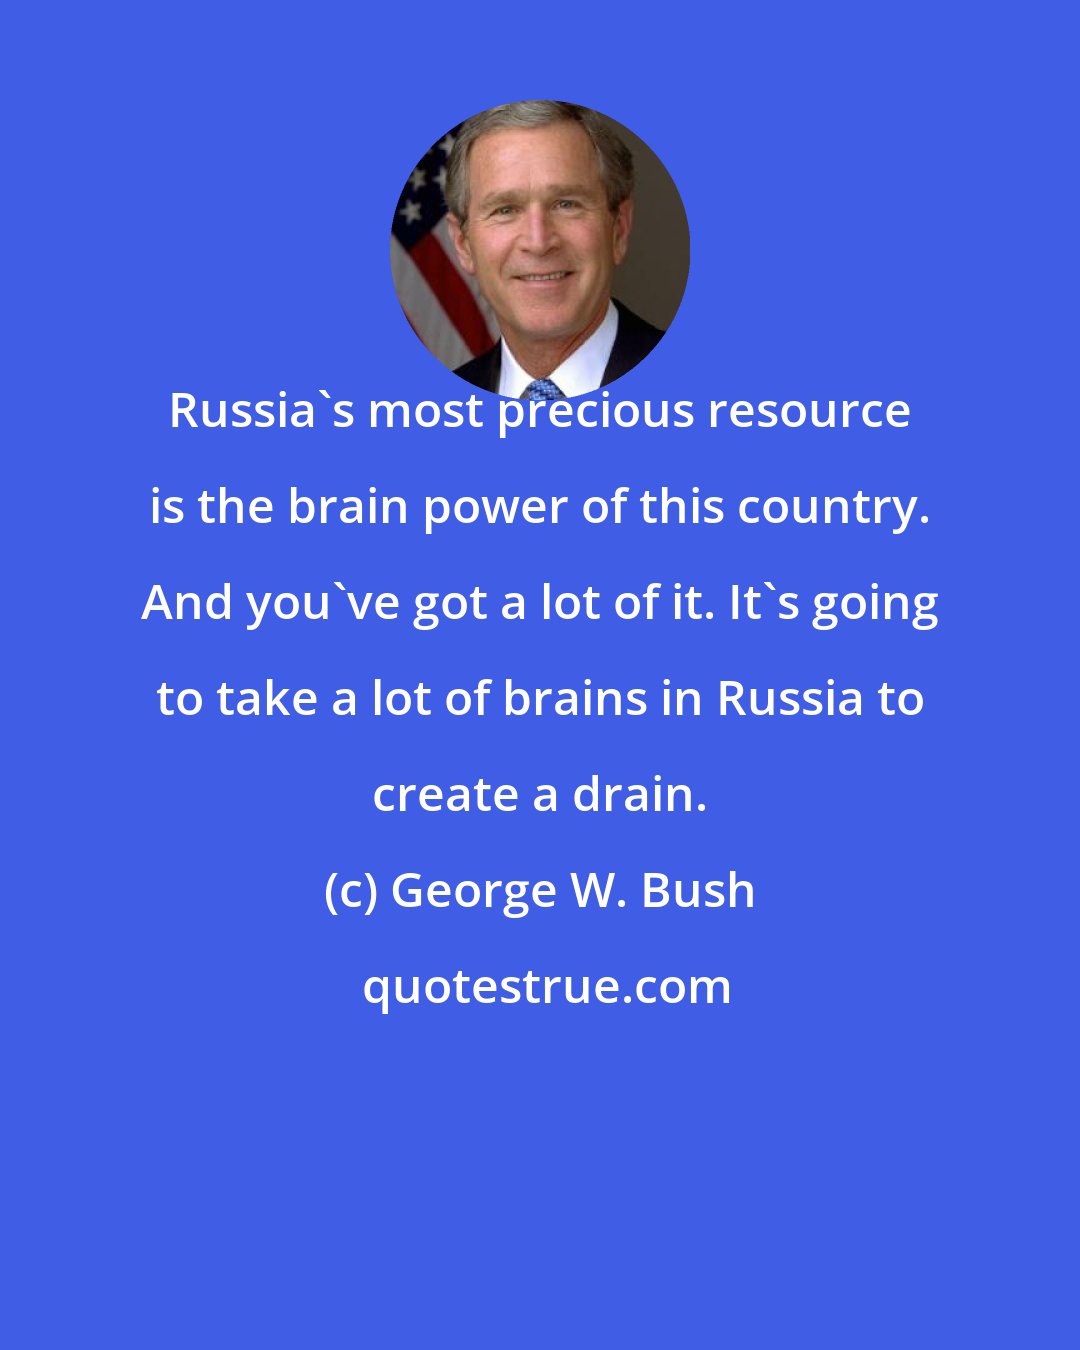 George W. Bush: Russia's most precious resource is the brain power of this country. And you've got a lot of it. It's going to take a lot of brains in Russia to create a drain.